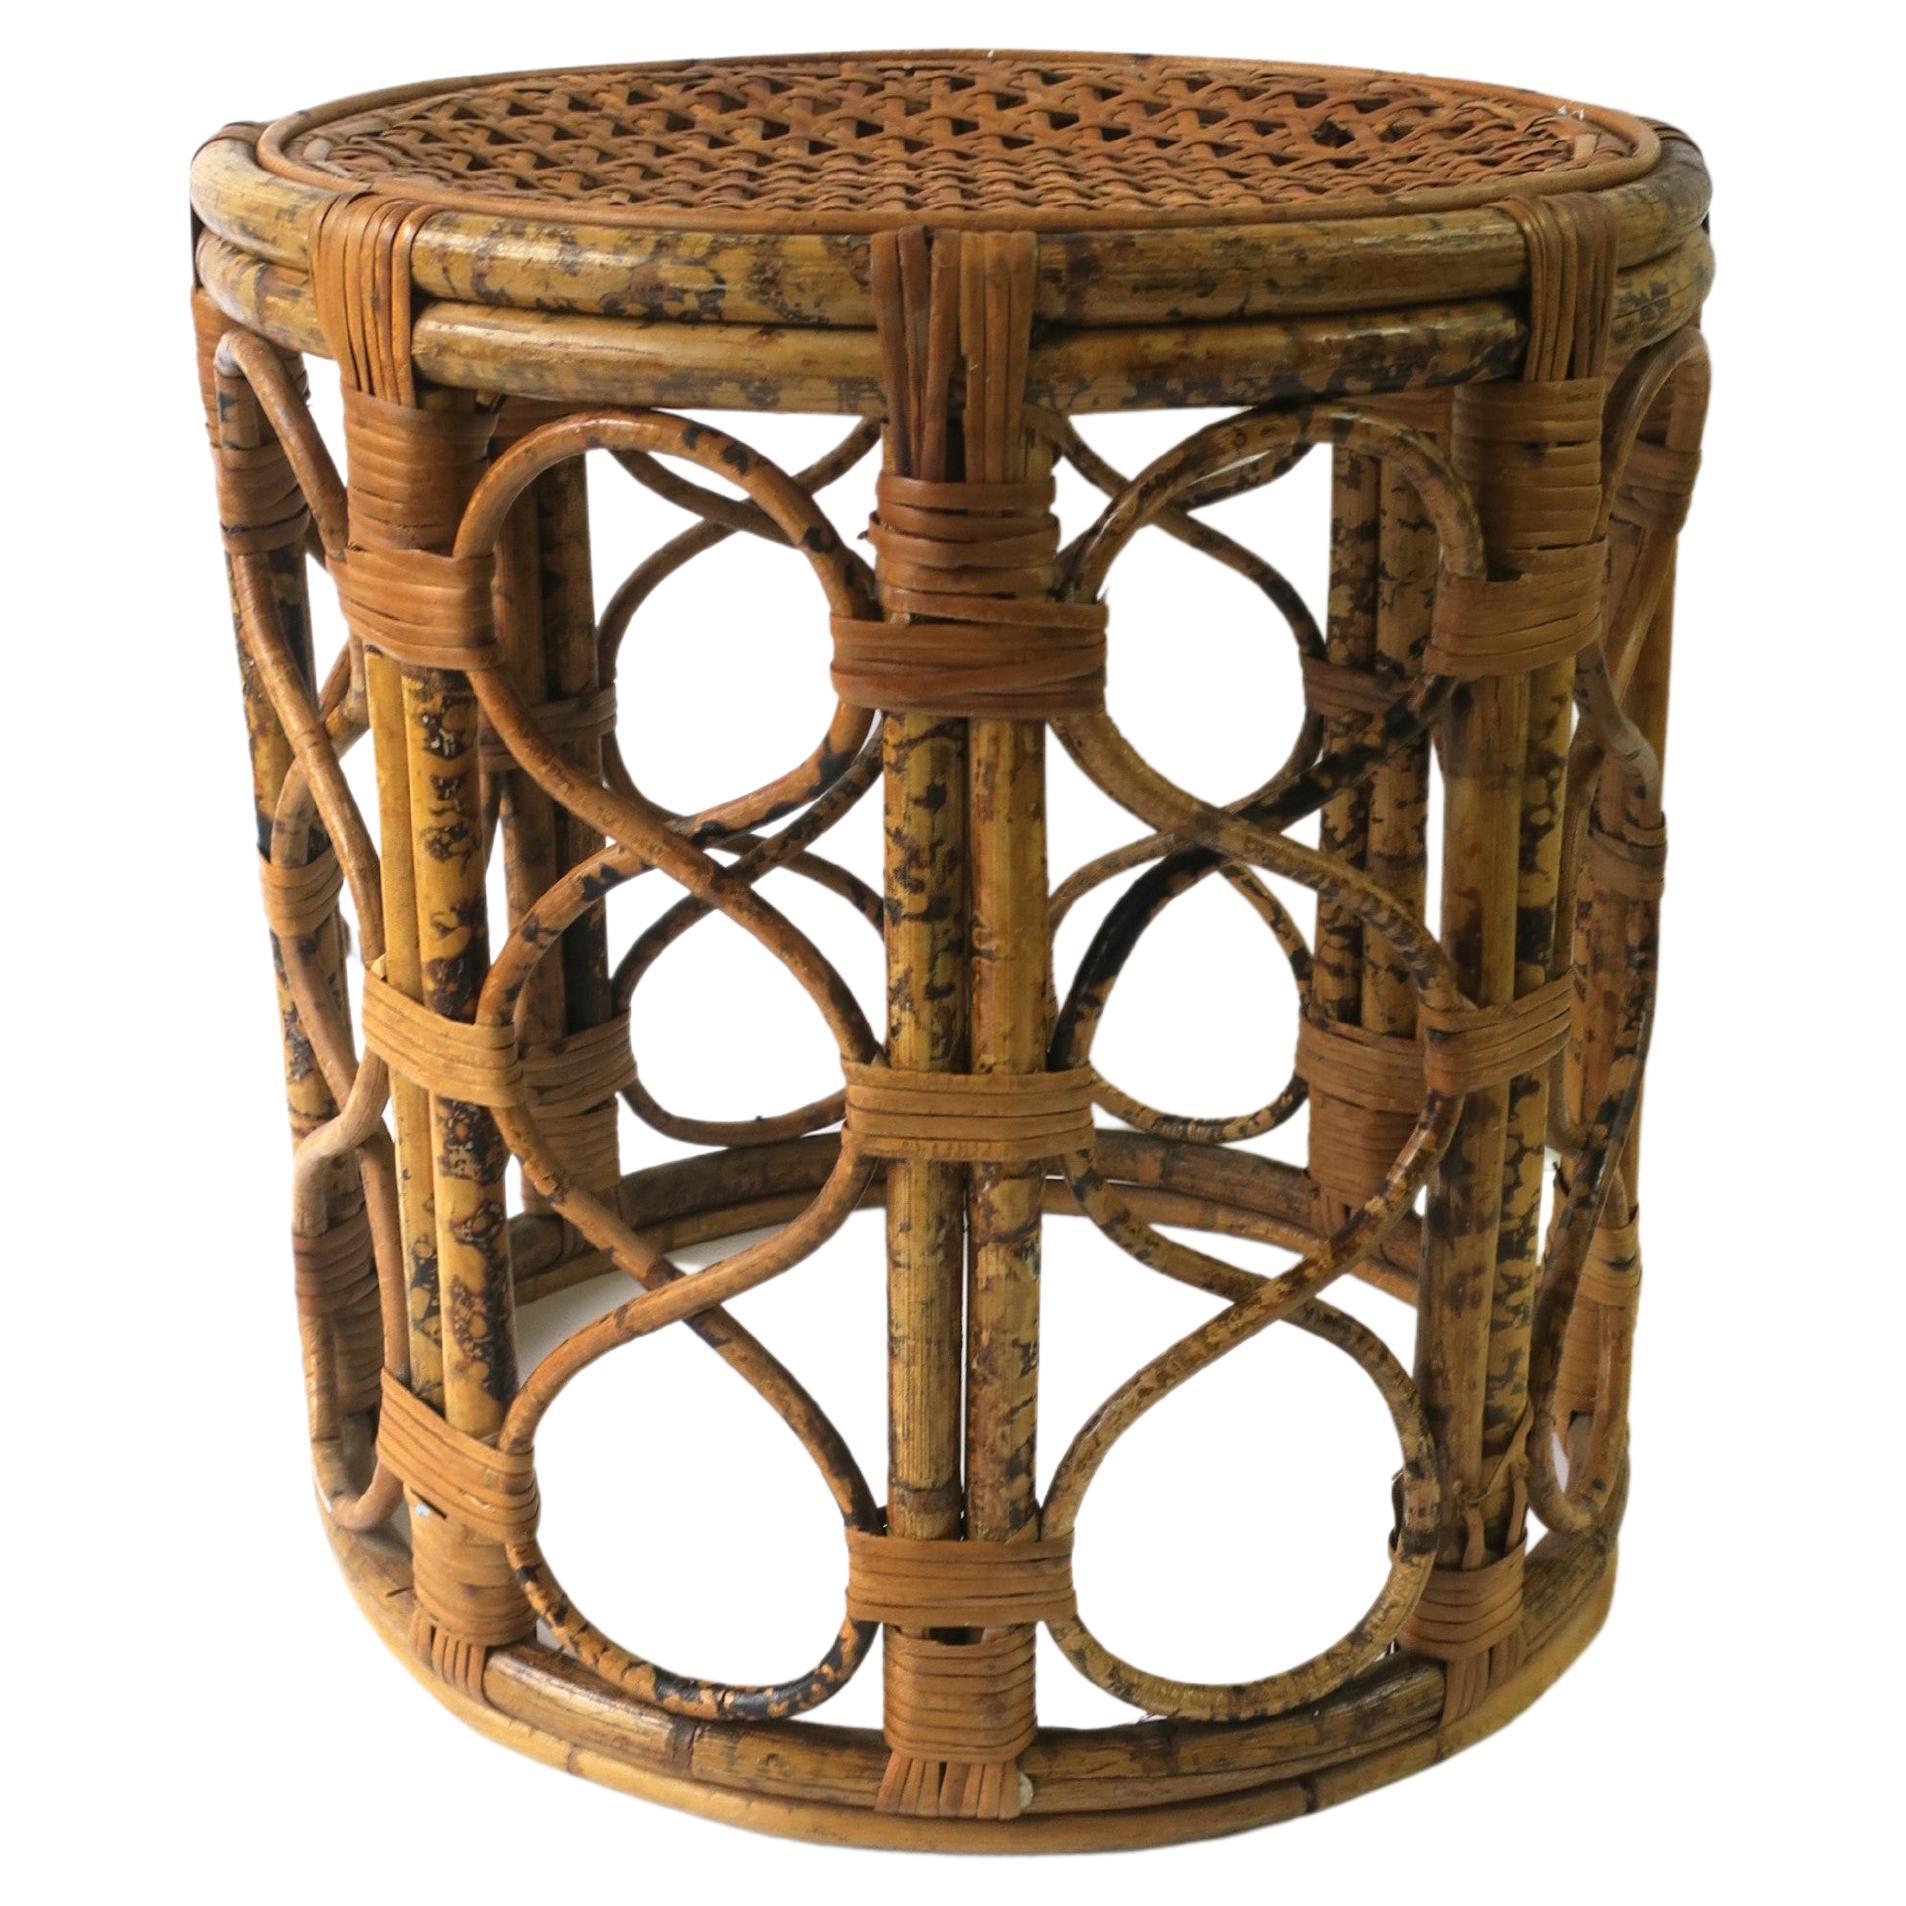 Wicker Bamboo Cane Rattan and Glass Side Drinks Table or Stool Albini Style 1